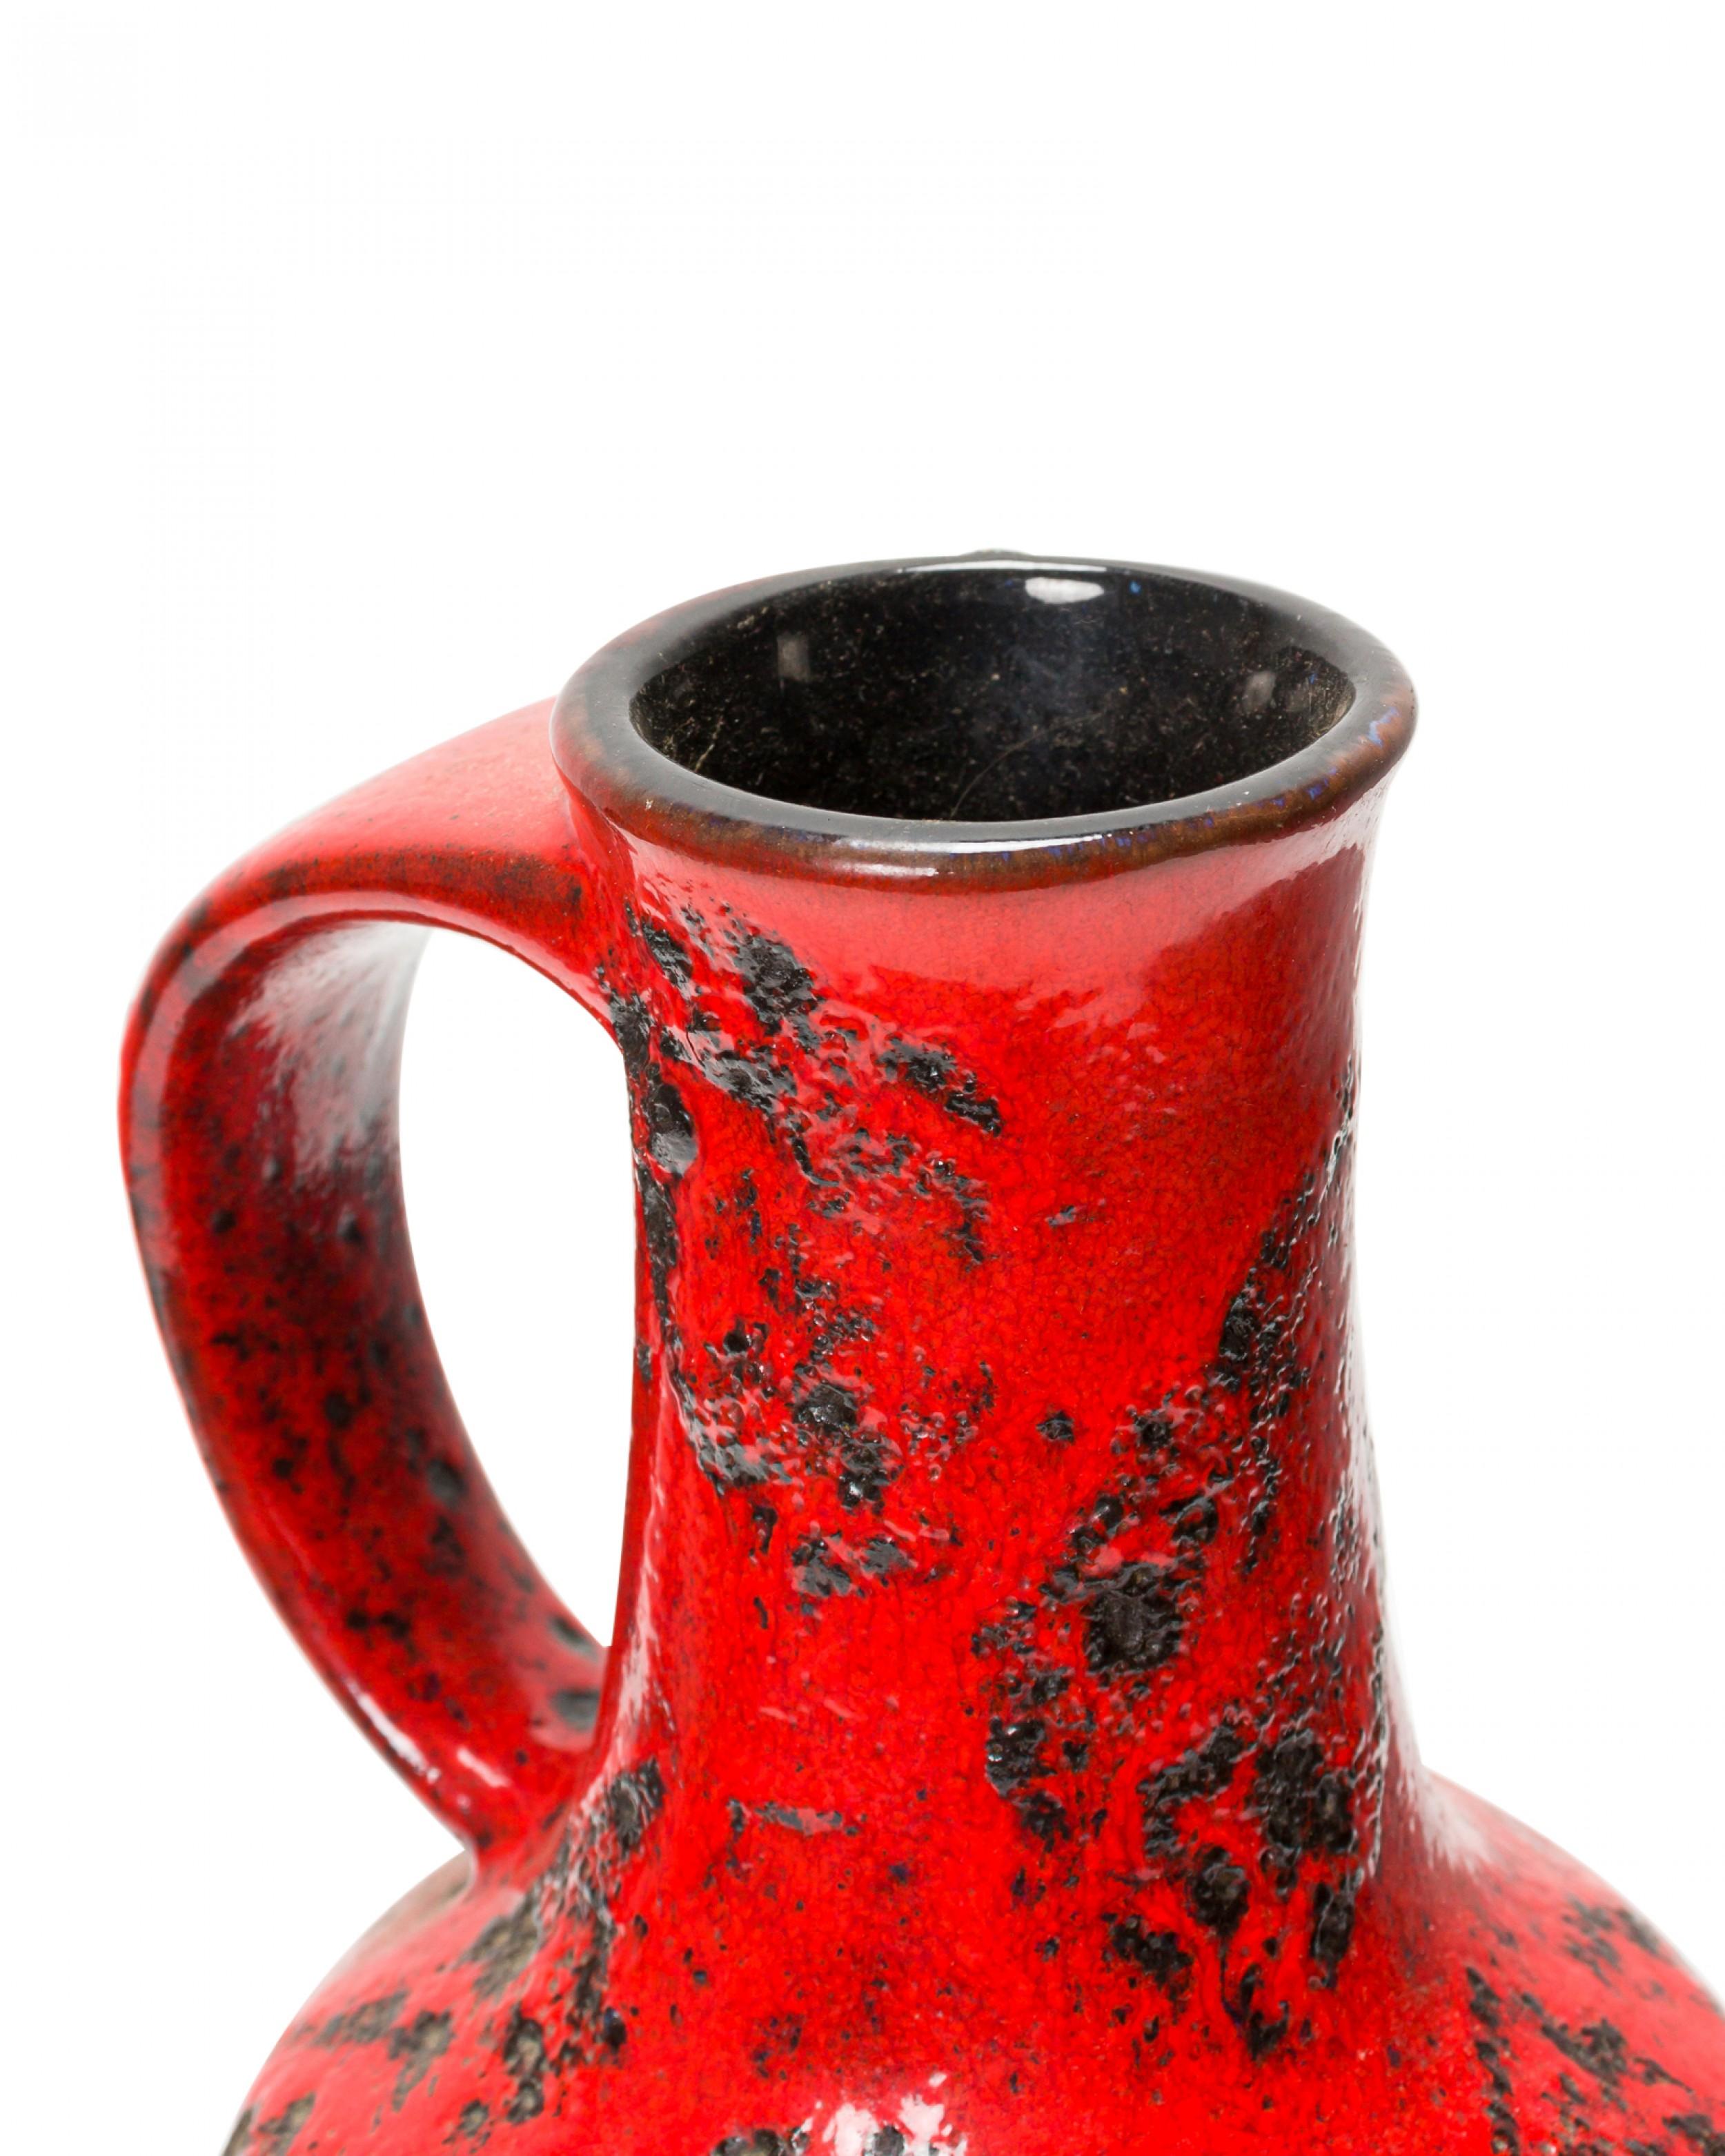 German mid-century ceramic cylindrical-form vase with a thinner neck with a rounded handle, finished in a red and black fat lava-style glaze.